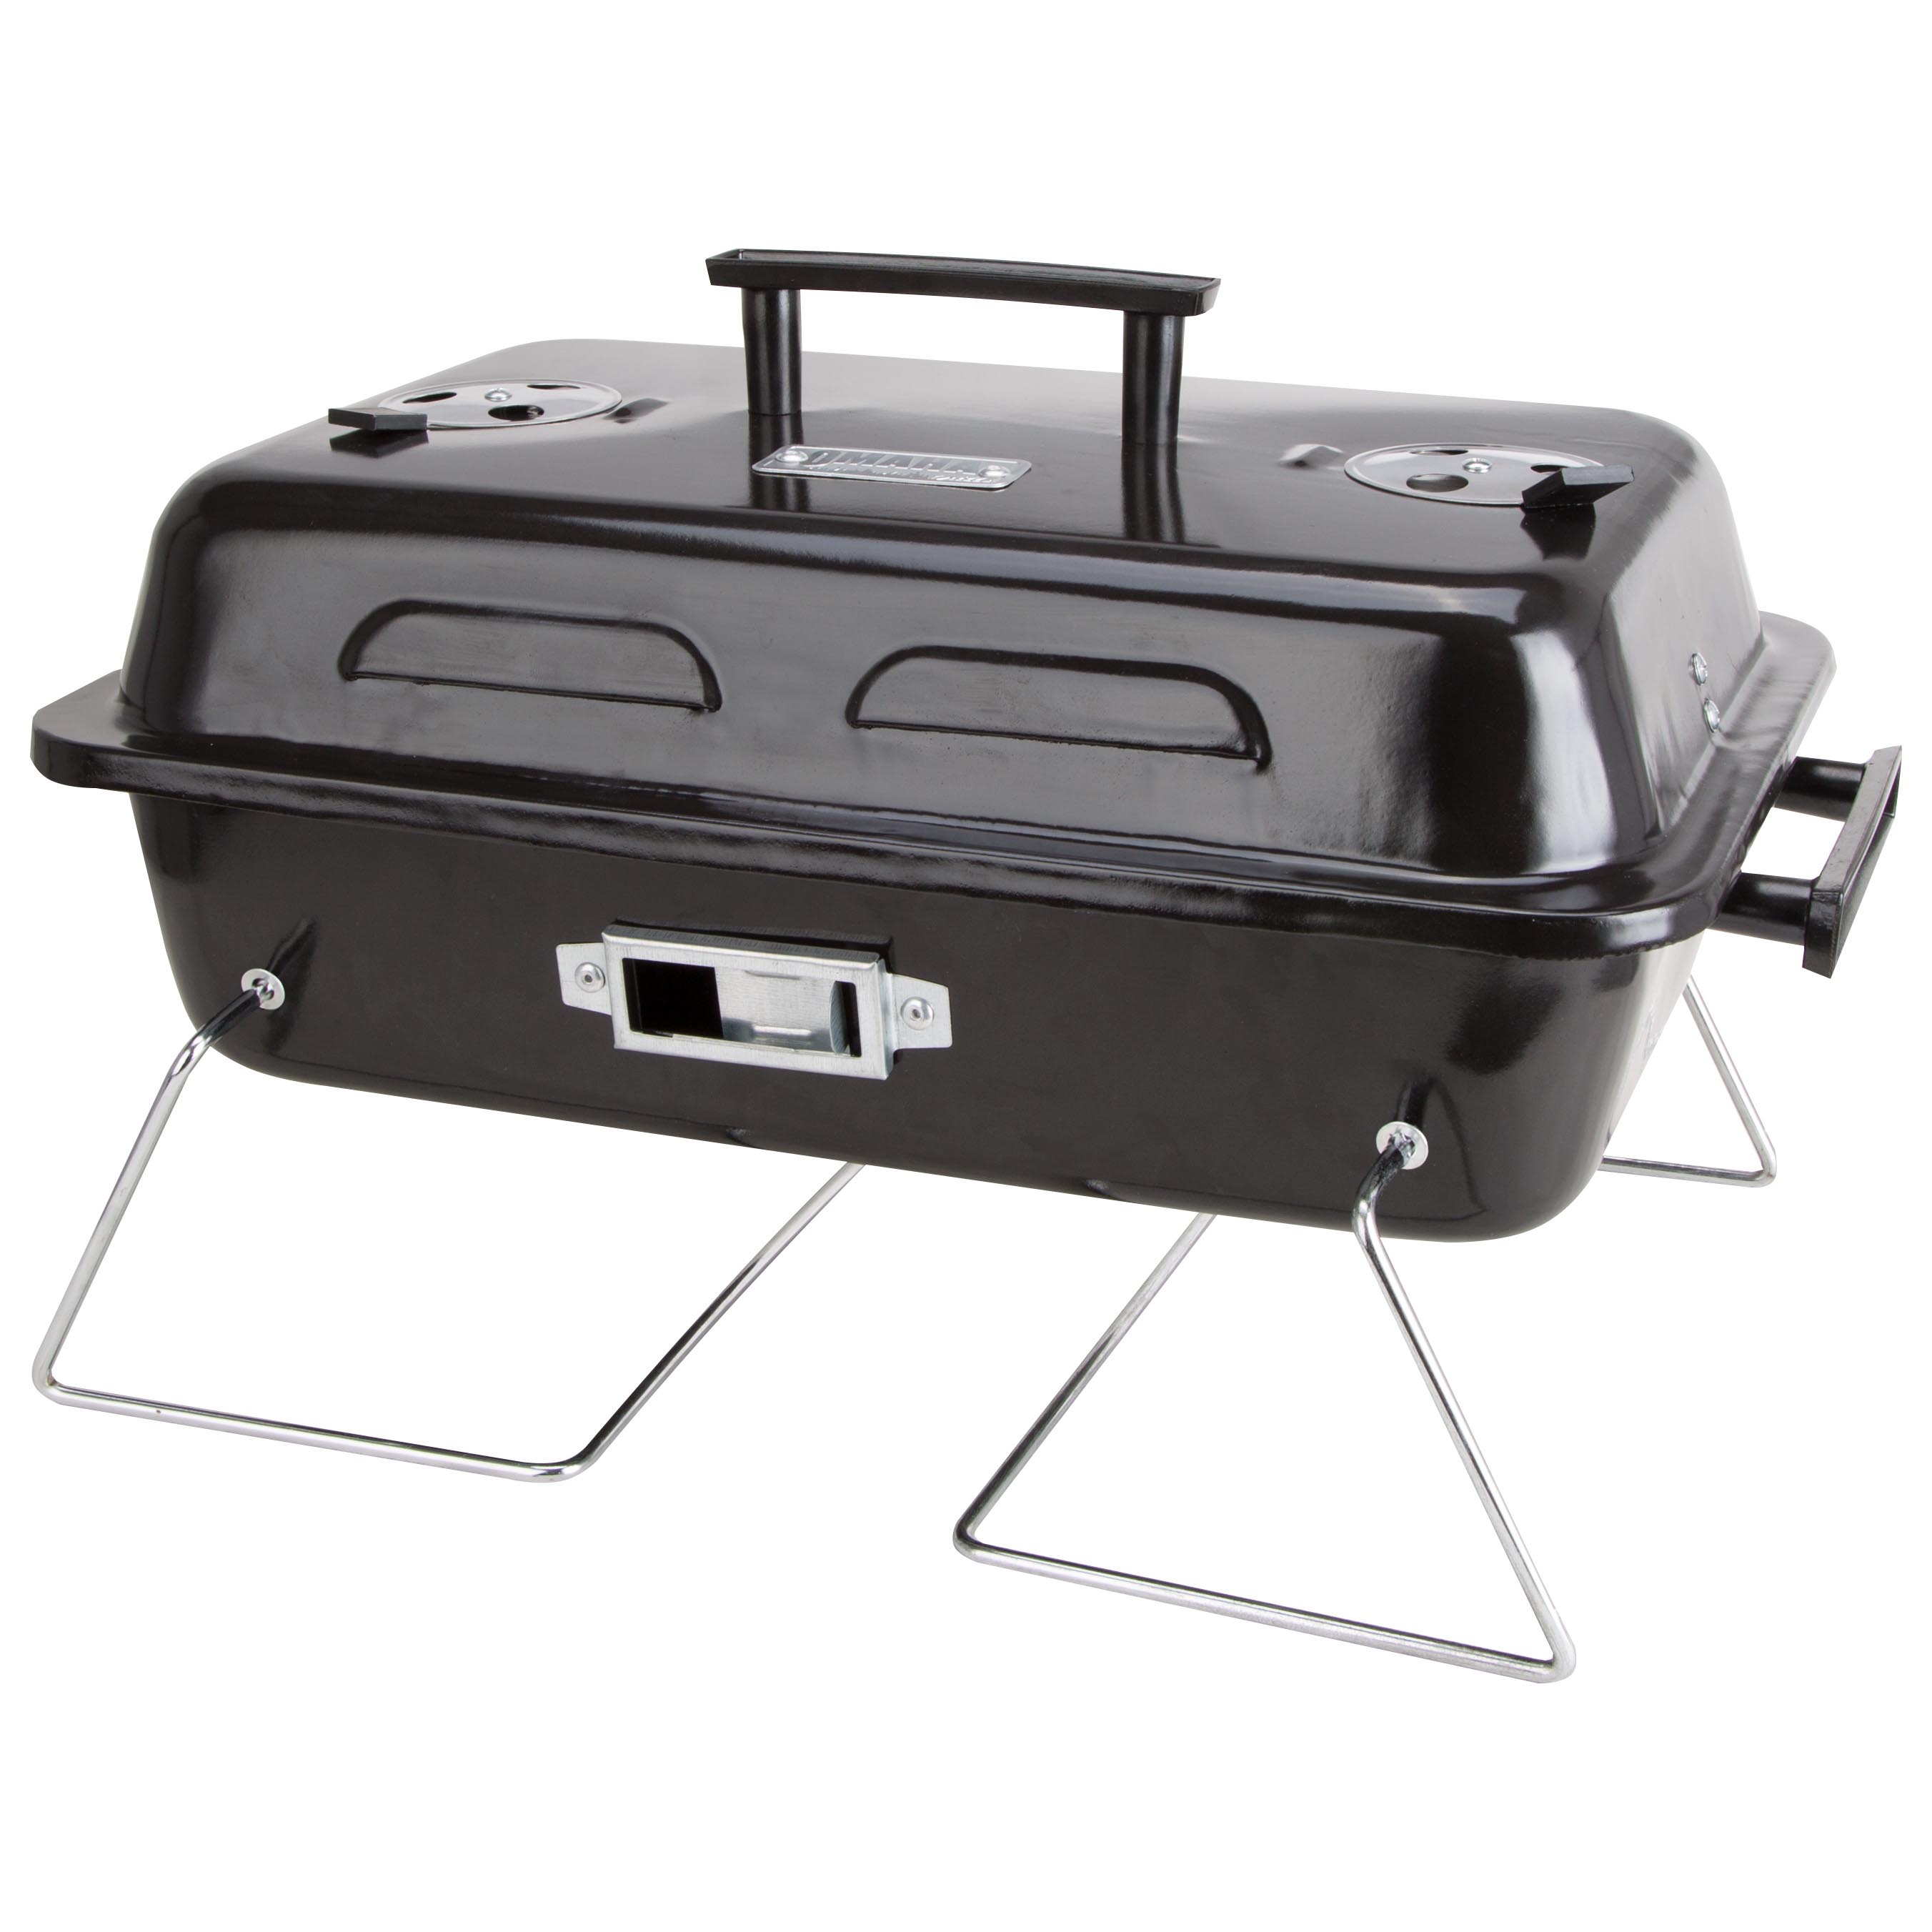 YS1082 Portable Charcoal Grill, 2 -Grate, 168 sq-in Primary Cooking Surface, Black, Steel Body